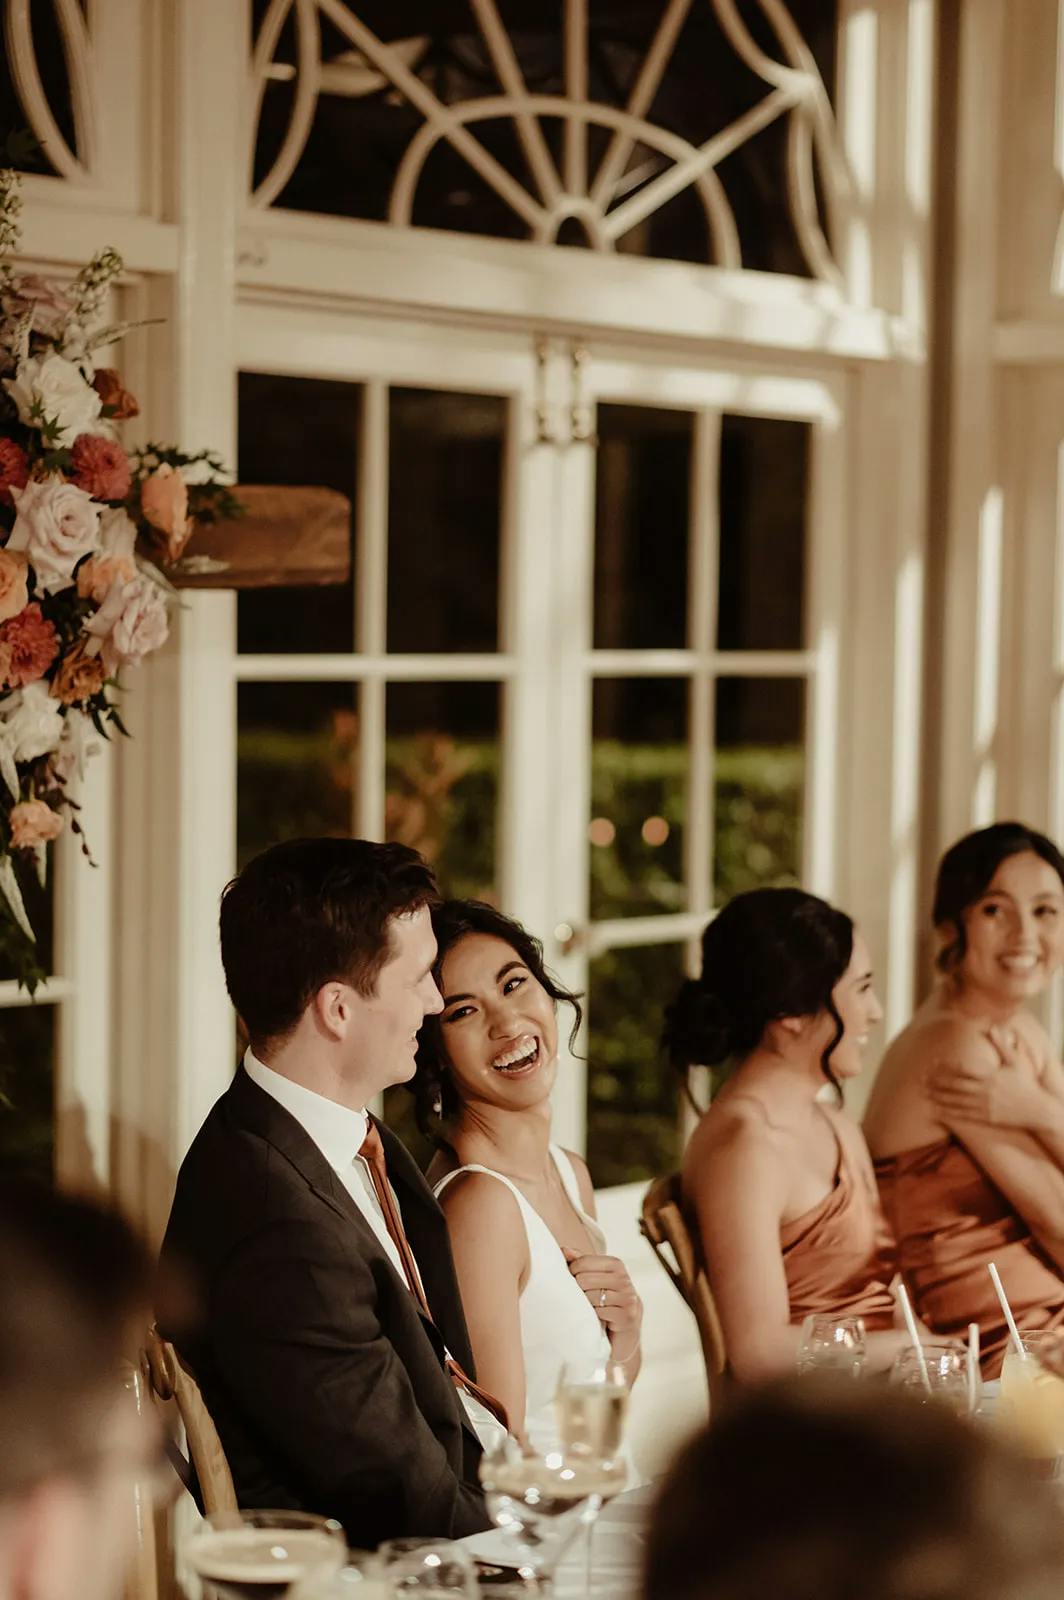 A bride and groom sit smiling at their wedding reception table. The bride, in a white dress, looks joyfully at the groom, who wears a suit and tie. Other guests, also smiling, are seated beside them. The background features large windows and a floral arrangement.